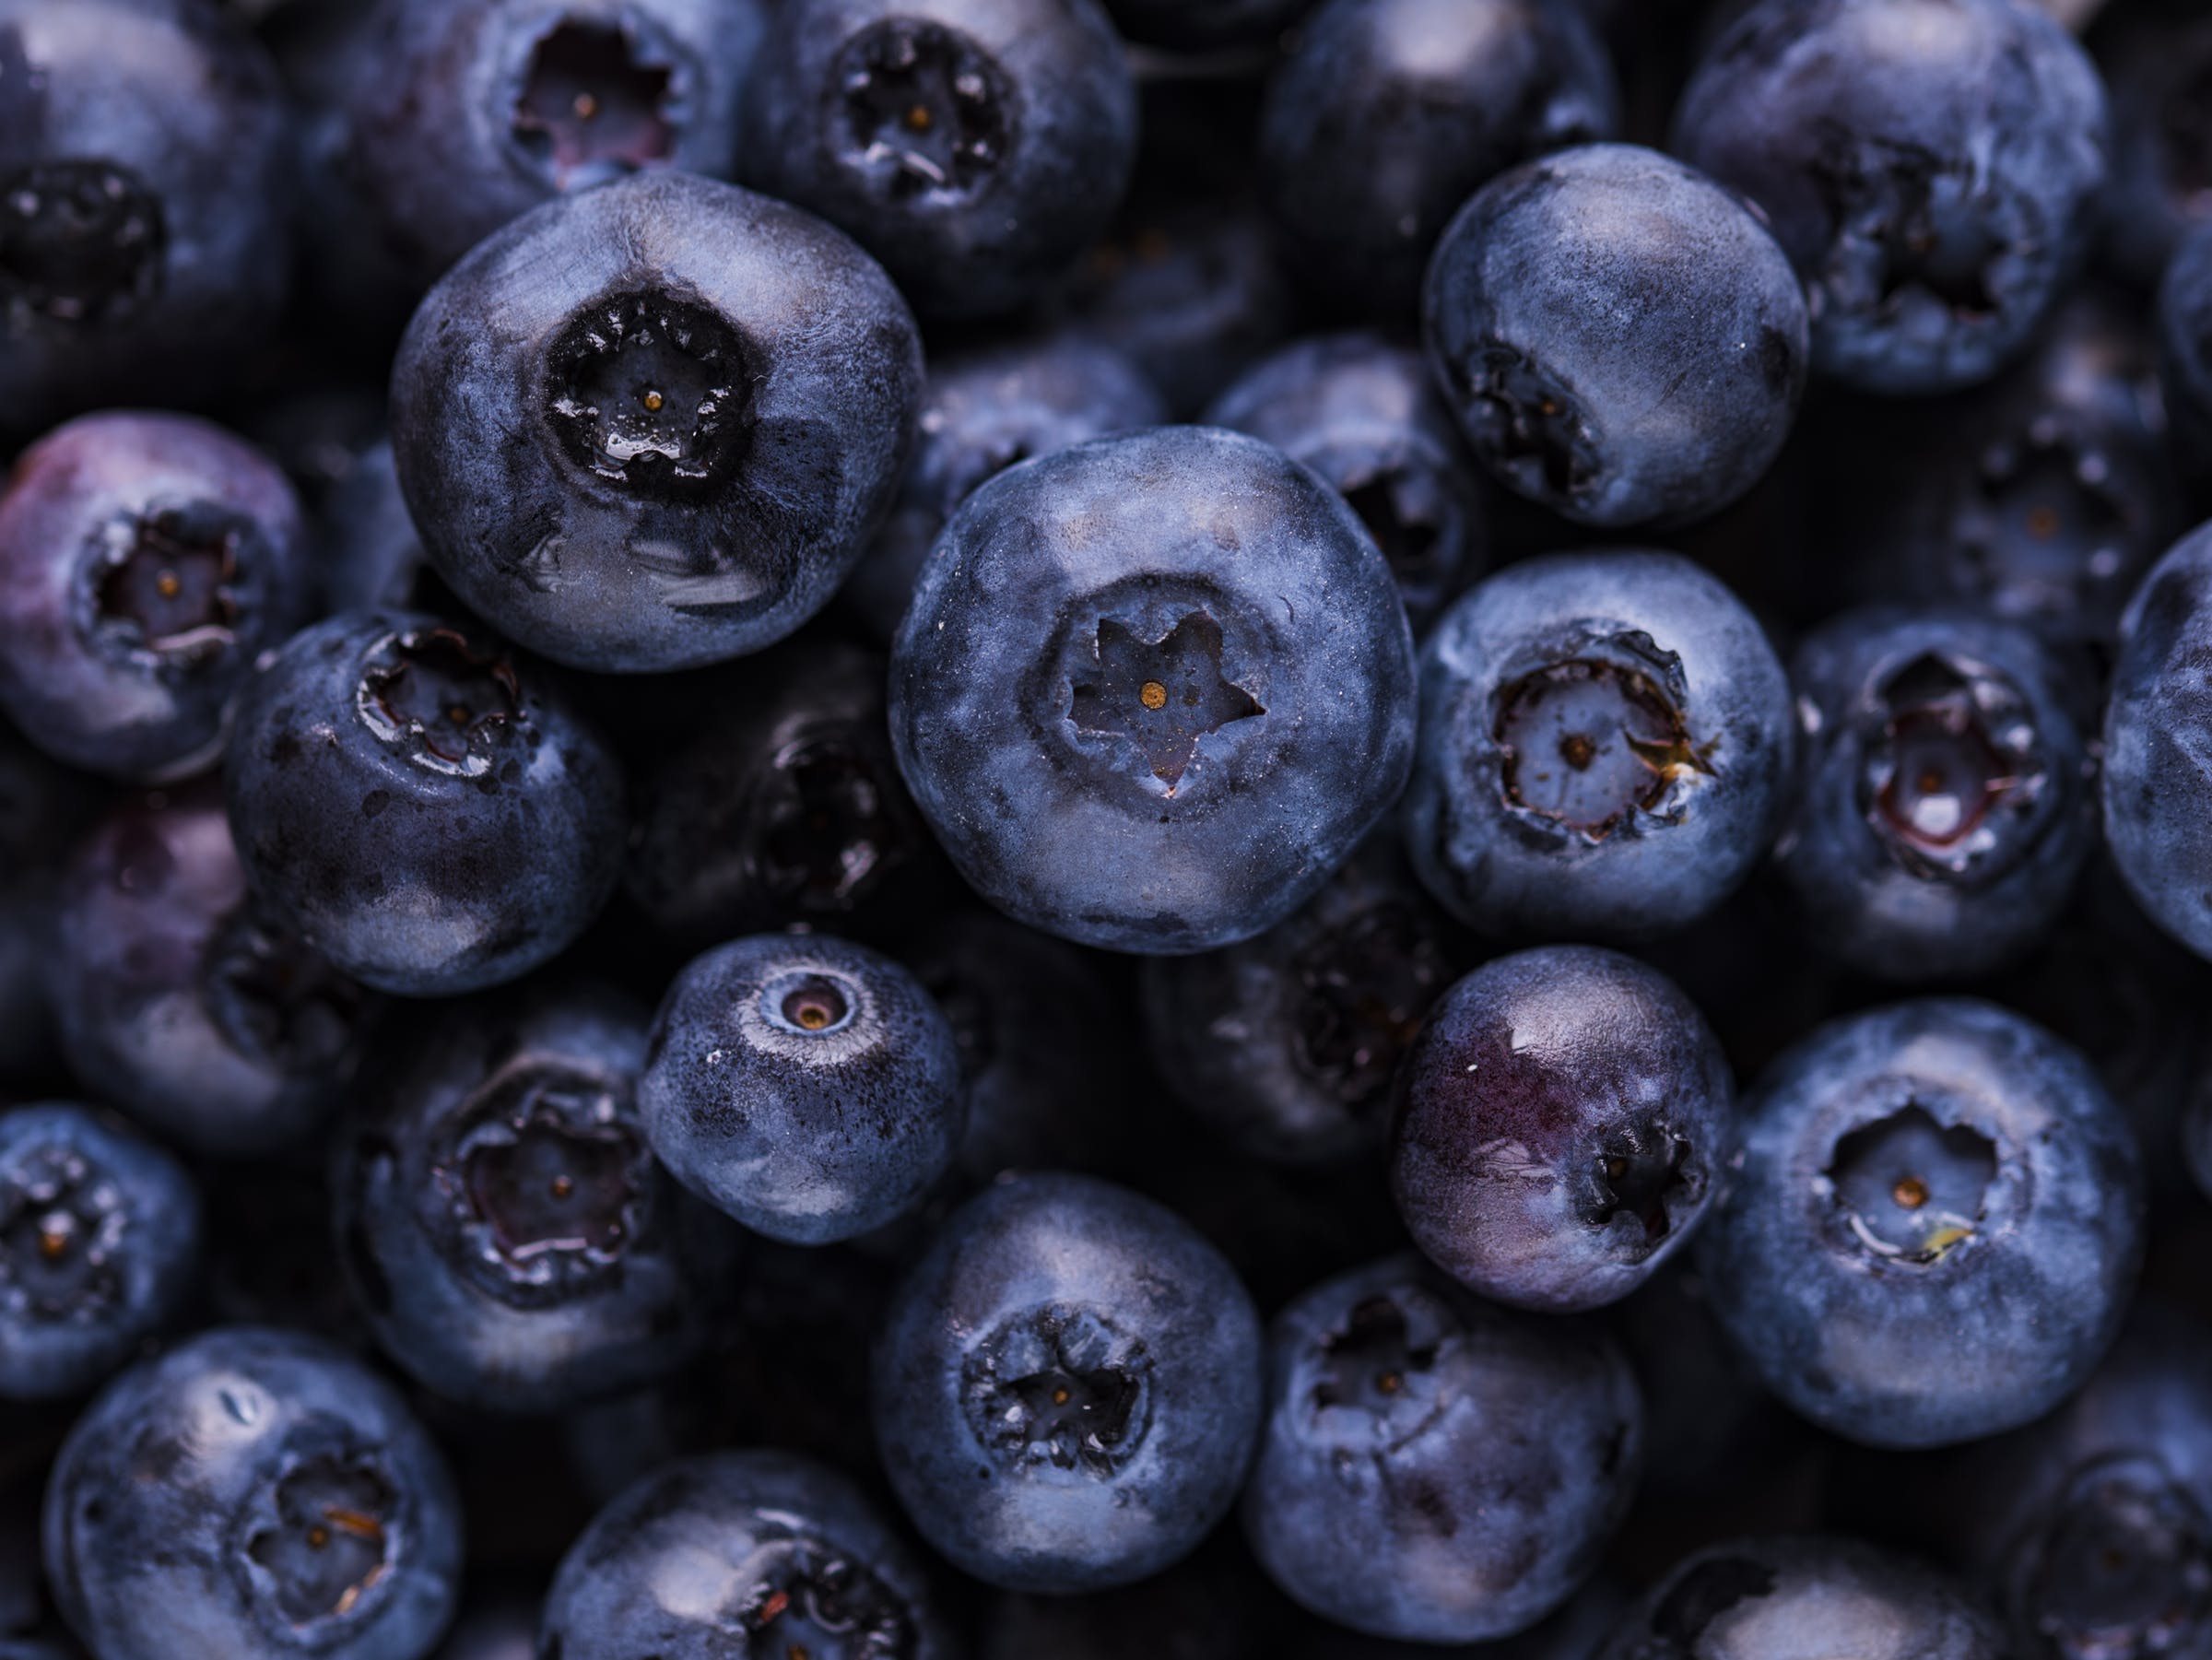 Grow Blueberries With More Antioxidants